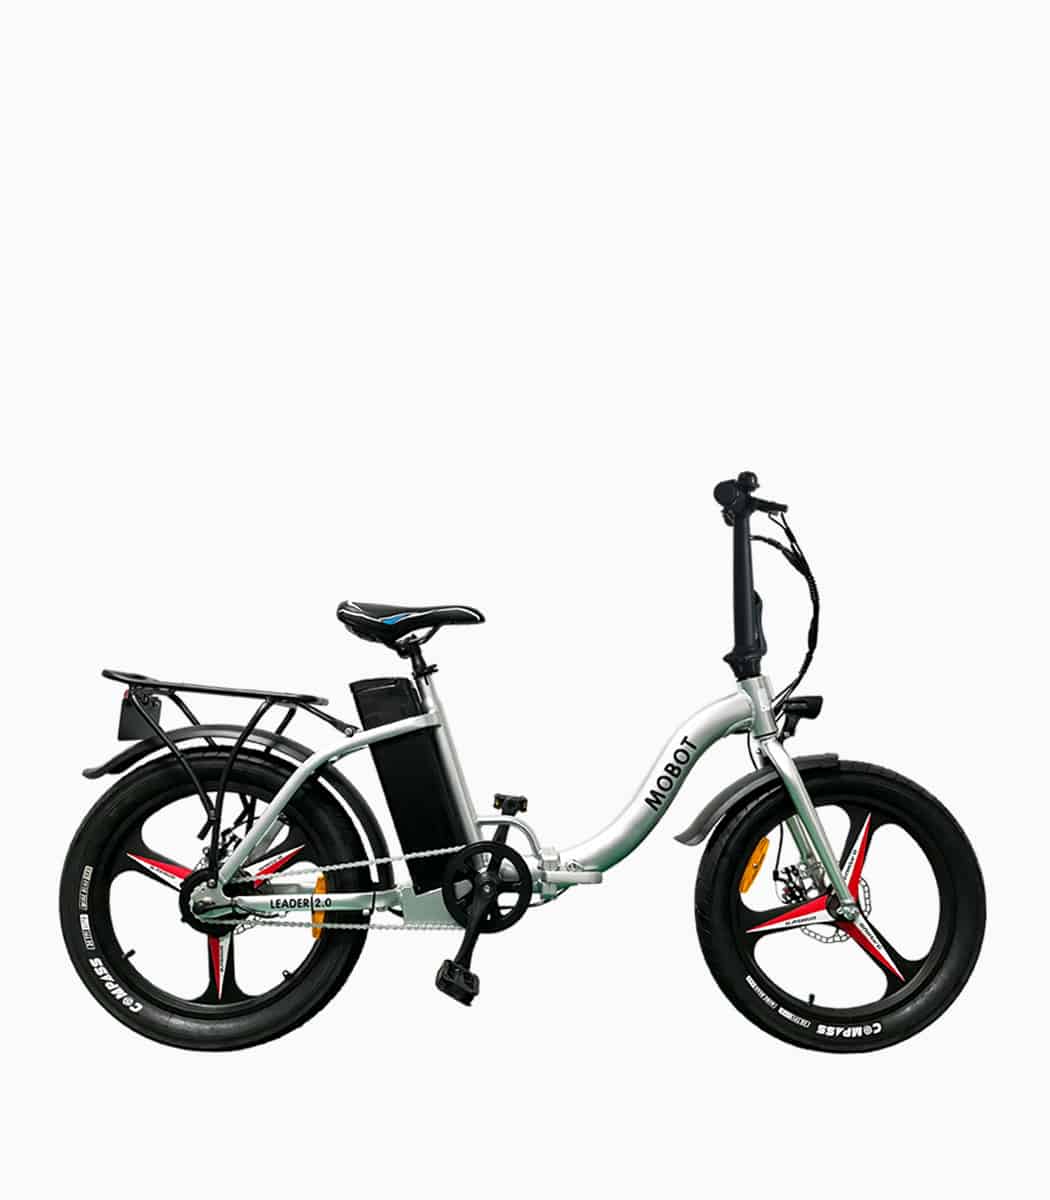 MOBOT Leader 2.0 (Silver15AH) LTA approved electric bicycle right